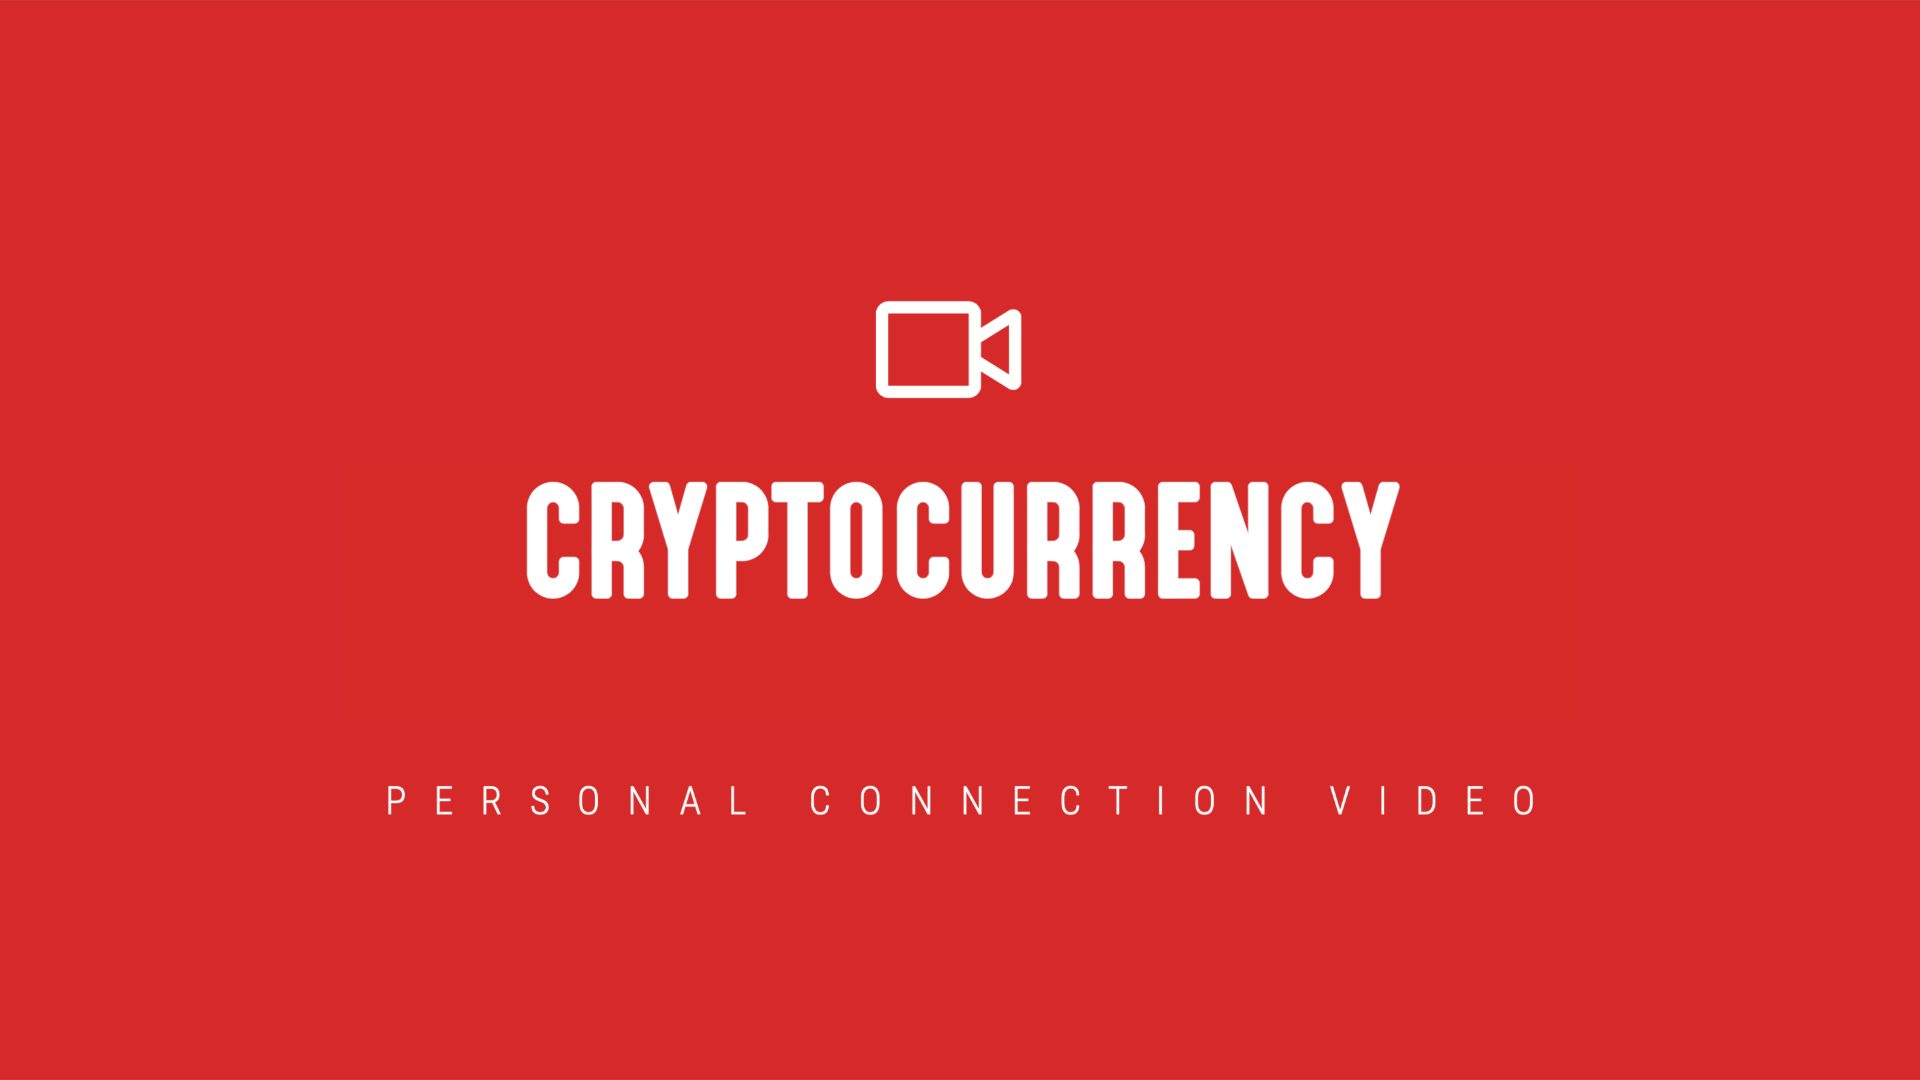 [NEW] Personal Connection Video | Cryptocurrency